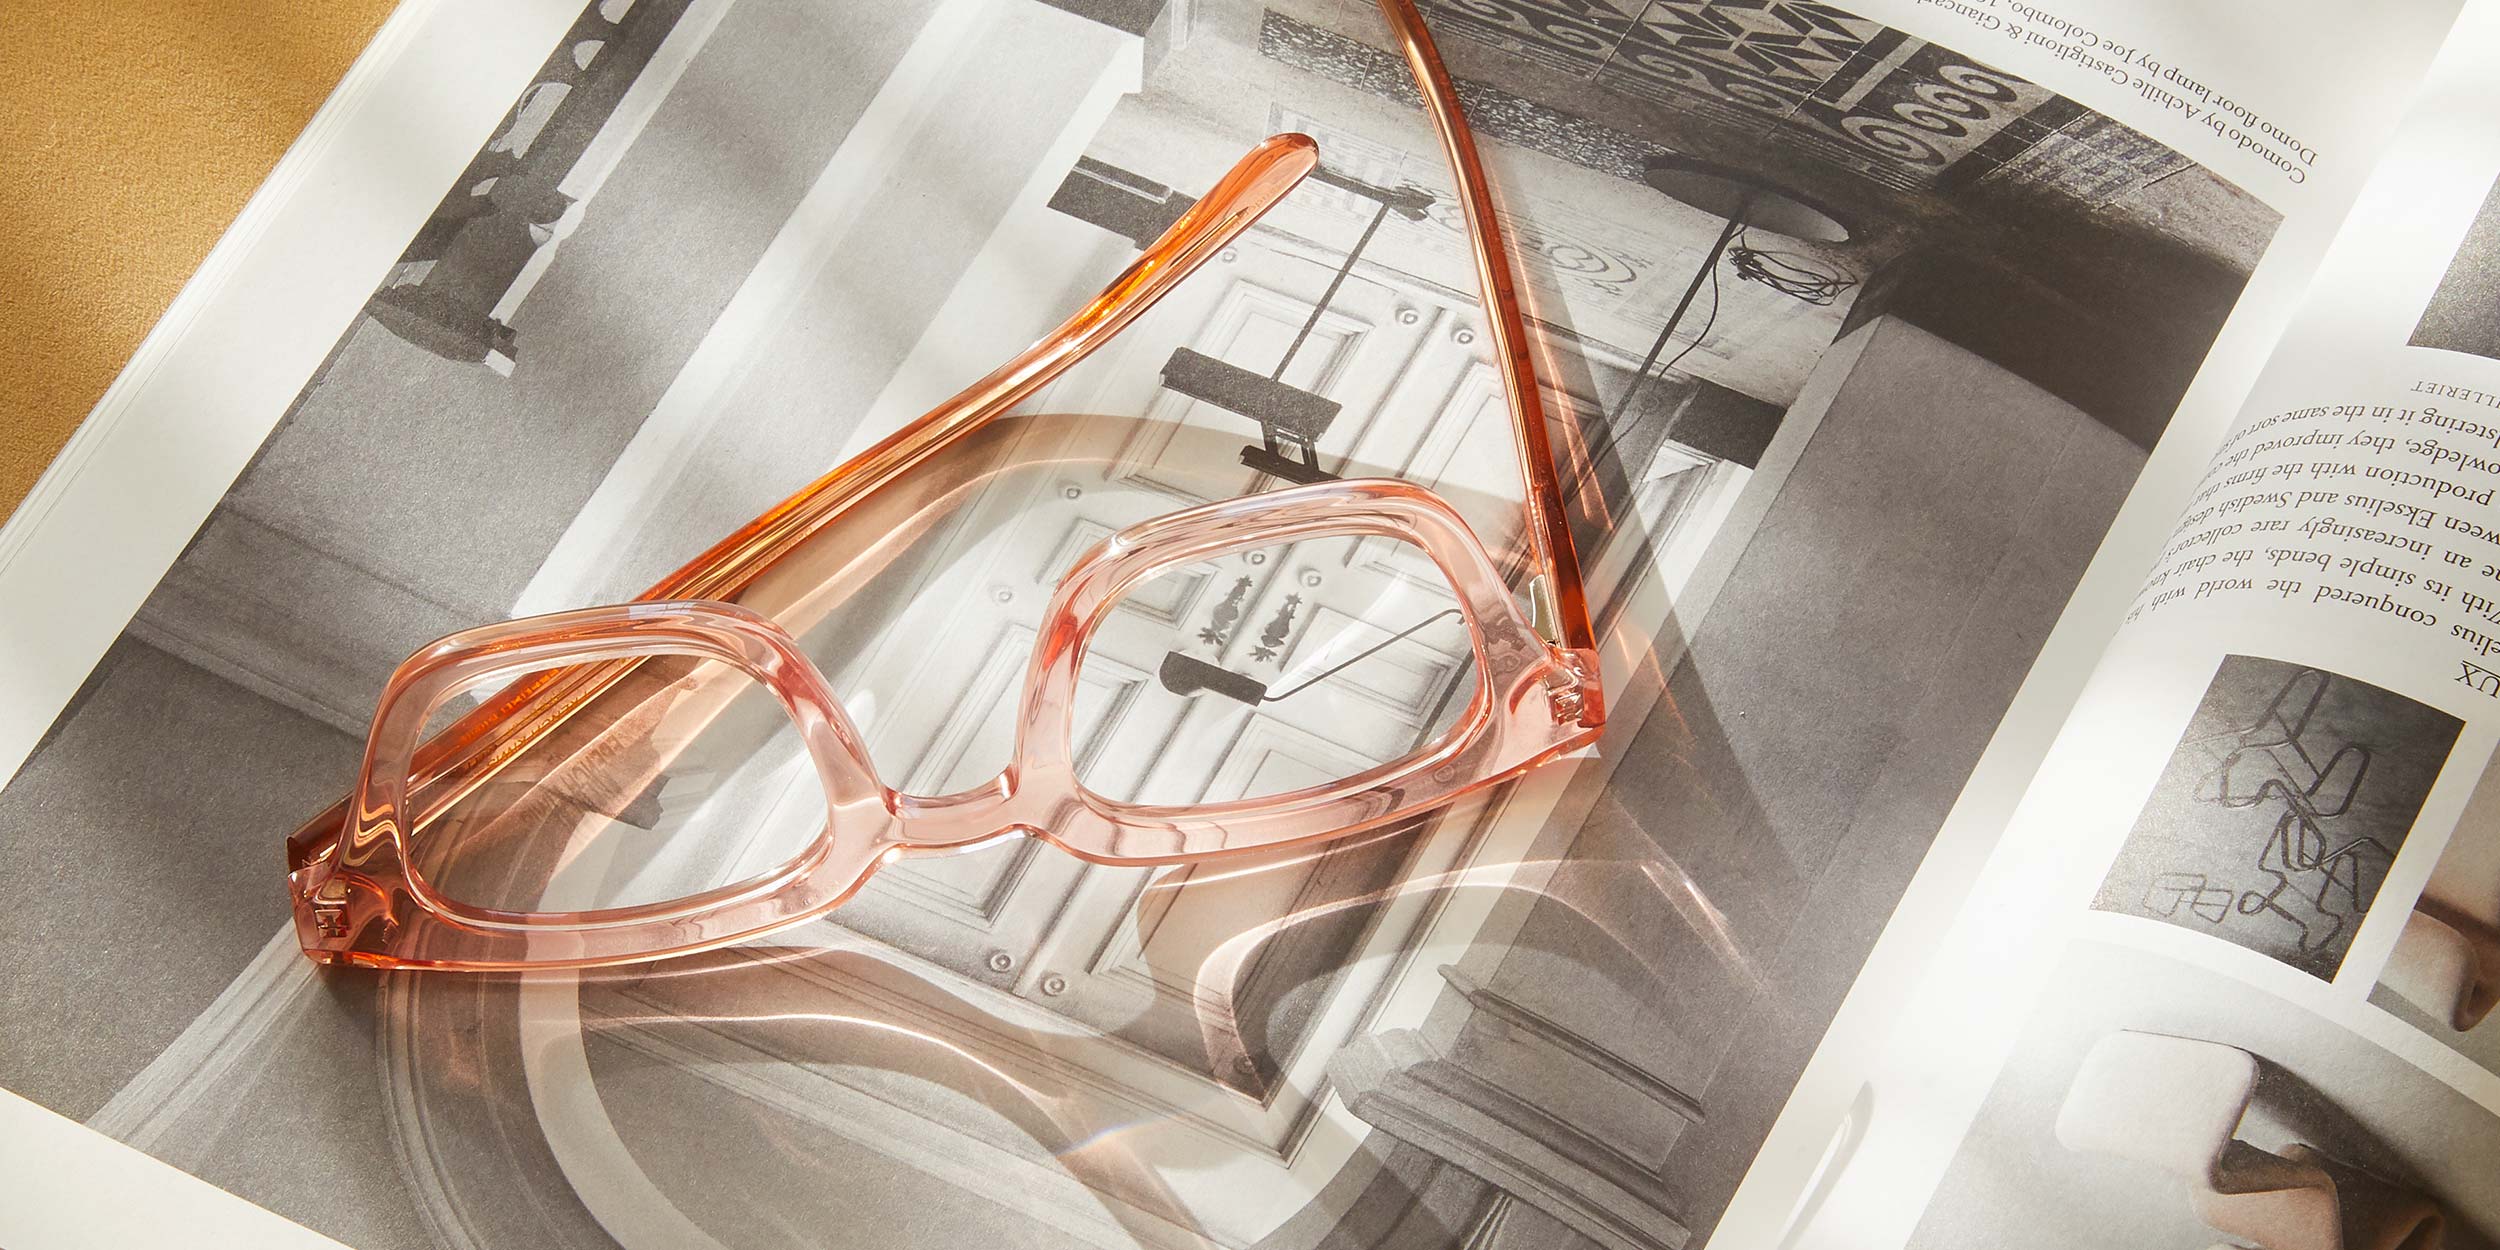 Photo Details of Ysée Clear Reading Glasses in a room